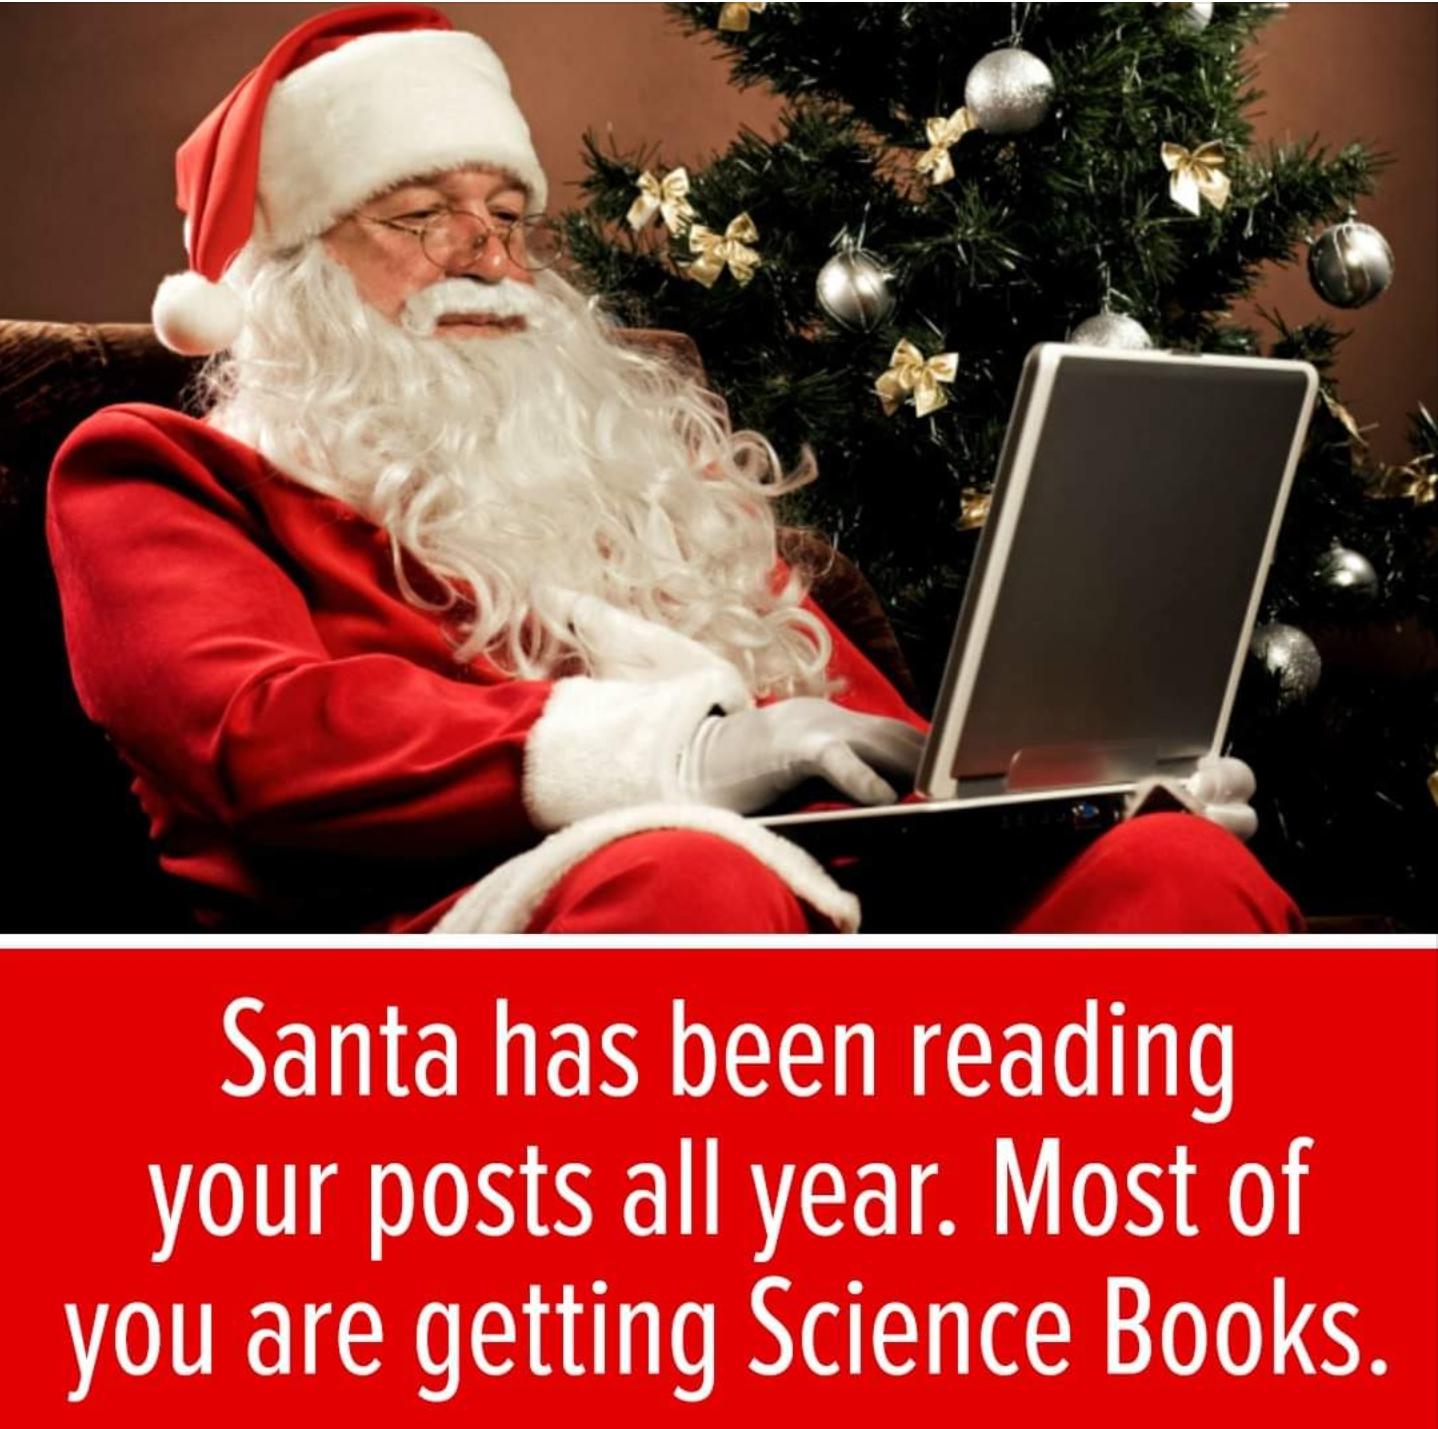 email santa claus - Santa has been reading your posts all year. Most of you are getting Science Books.